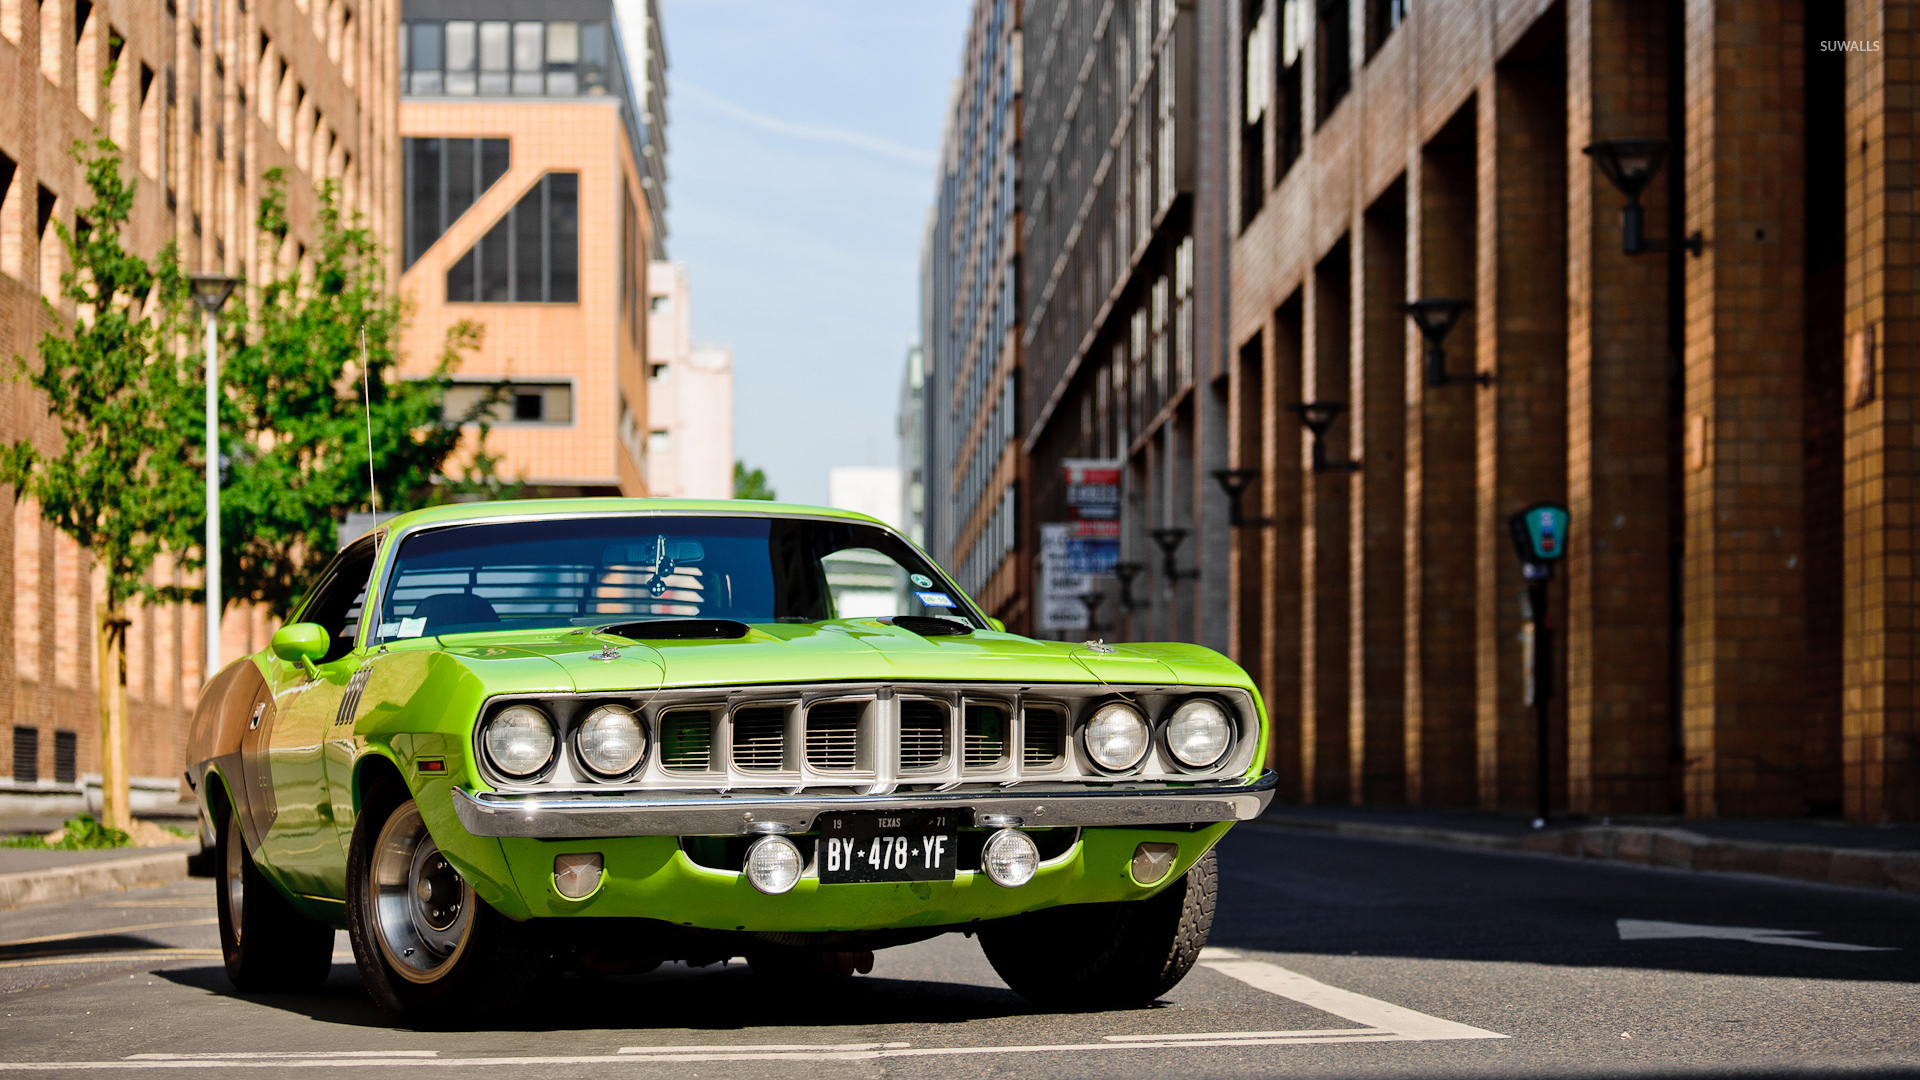 1971 Plymouth Barracuda In The City Wallpaper Car HD Wallpapers Download Free Map Images Wallpaper [wallpaper376.blogspot.com]